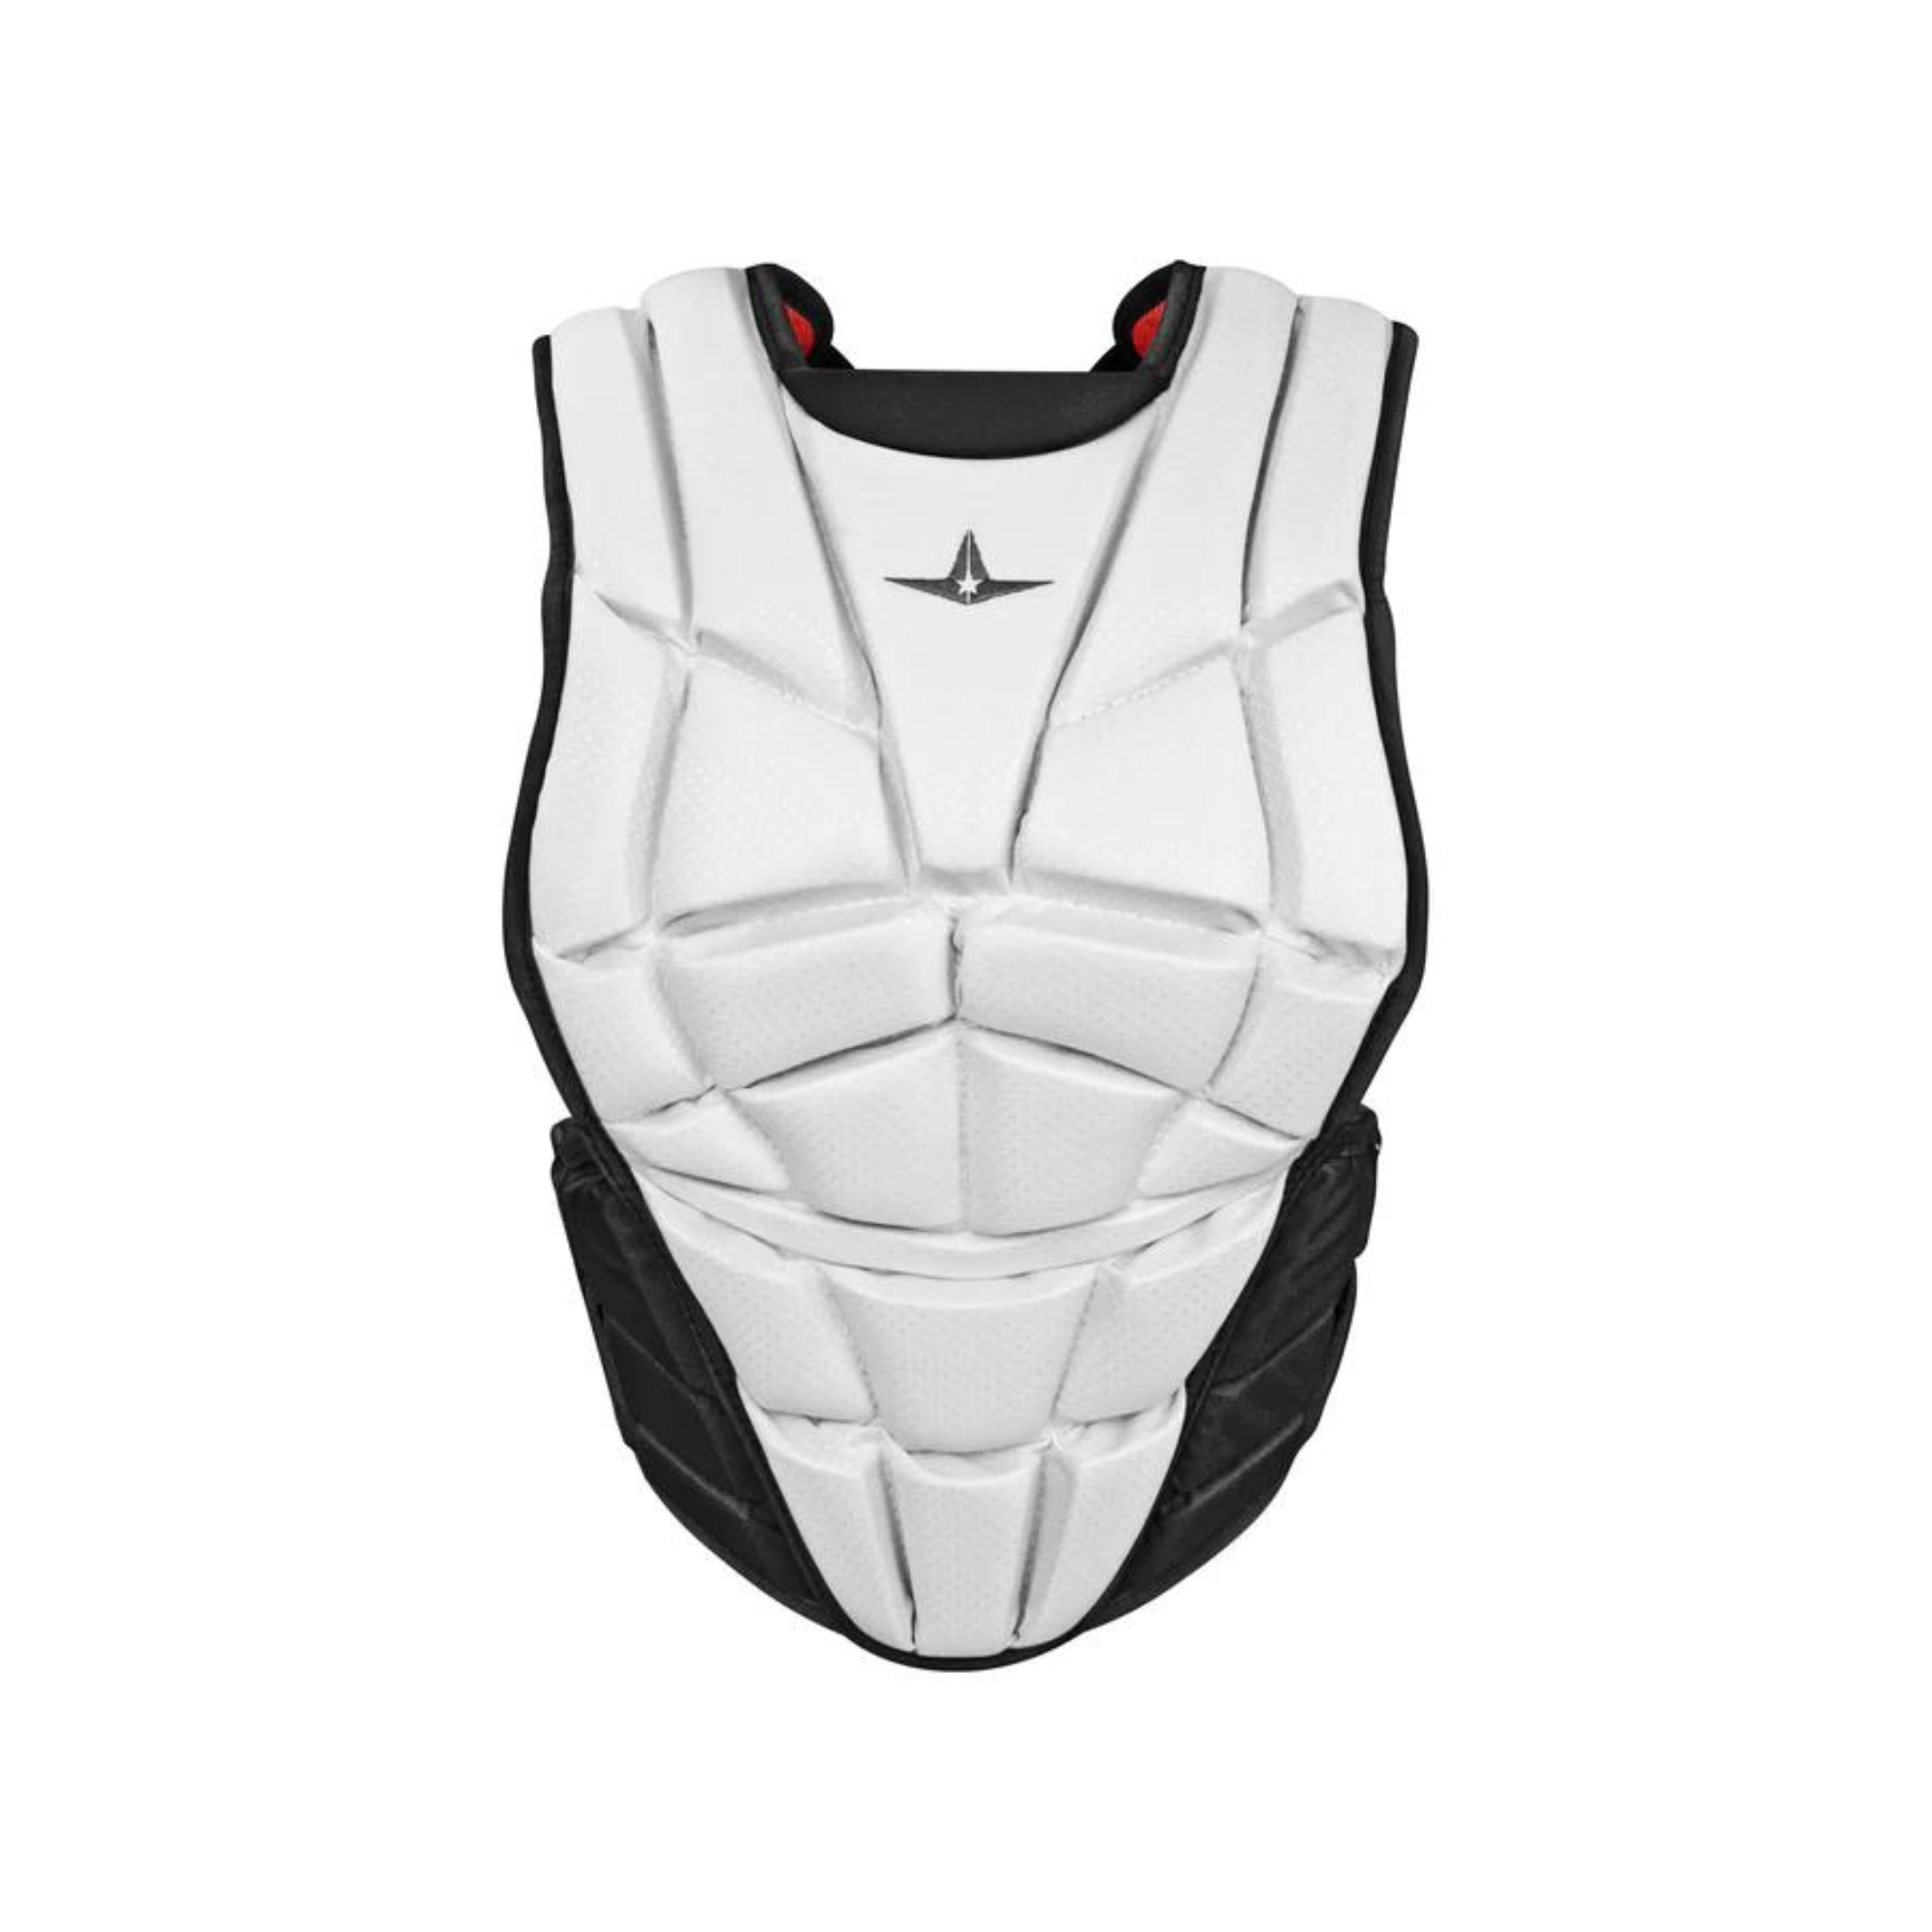 All-Star AFx Fastpitch Chest Protector WH/BK